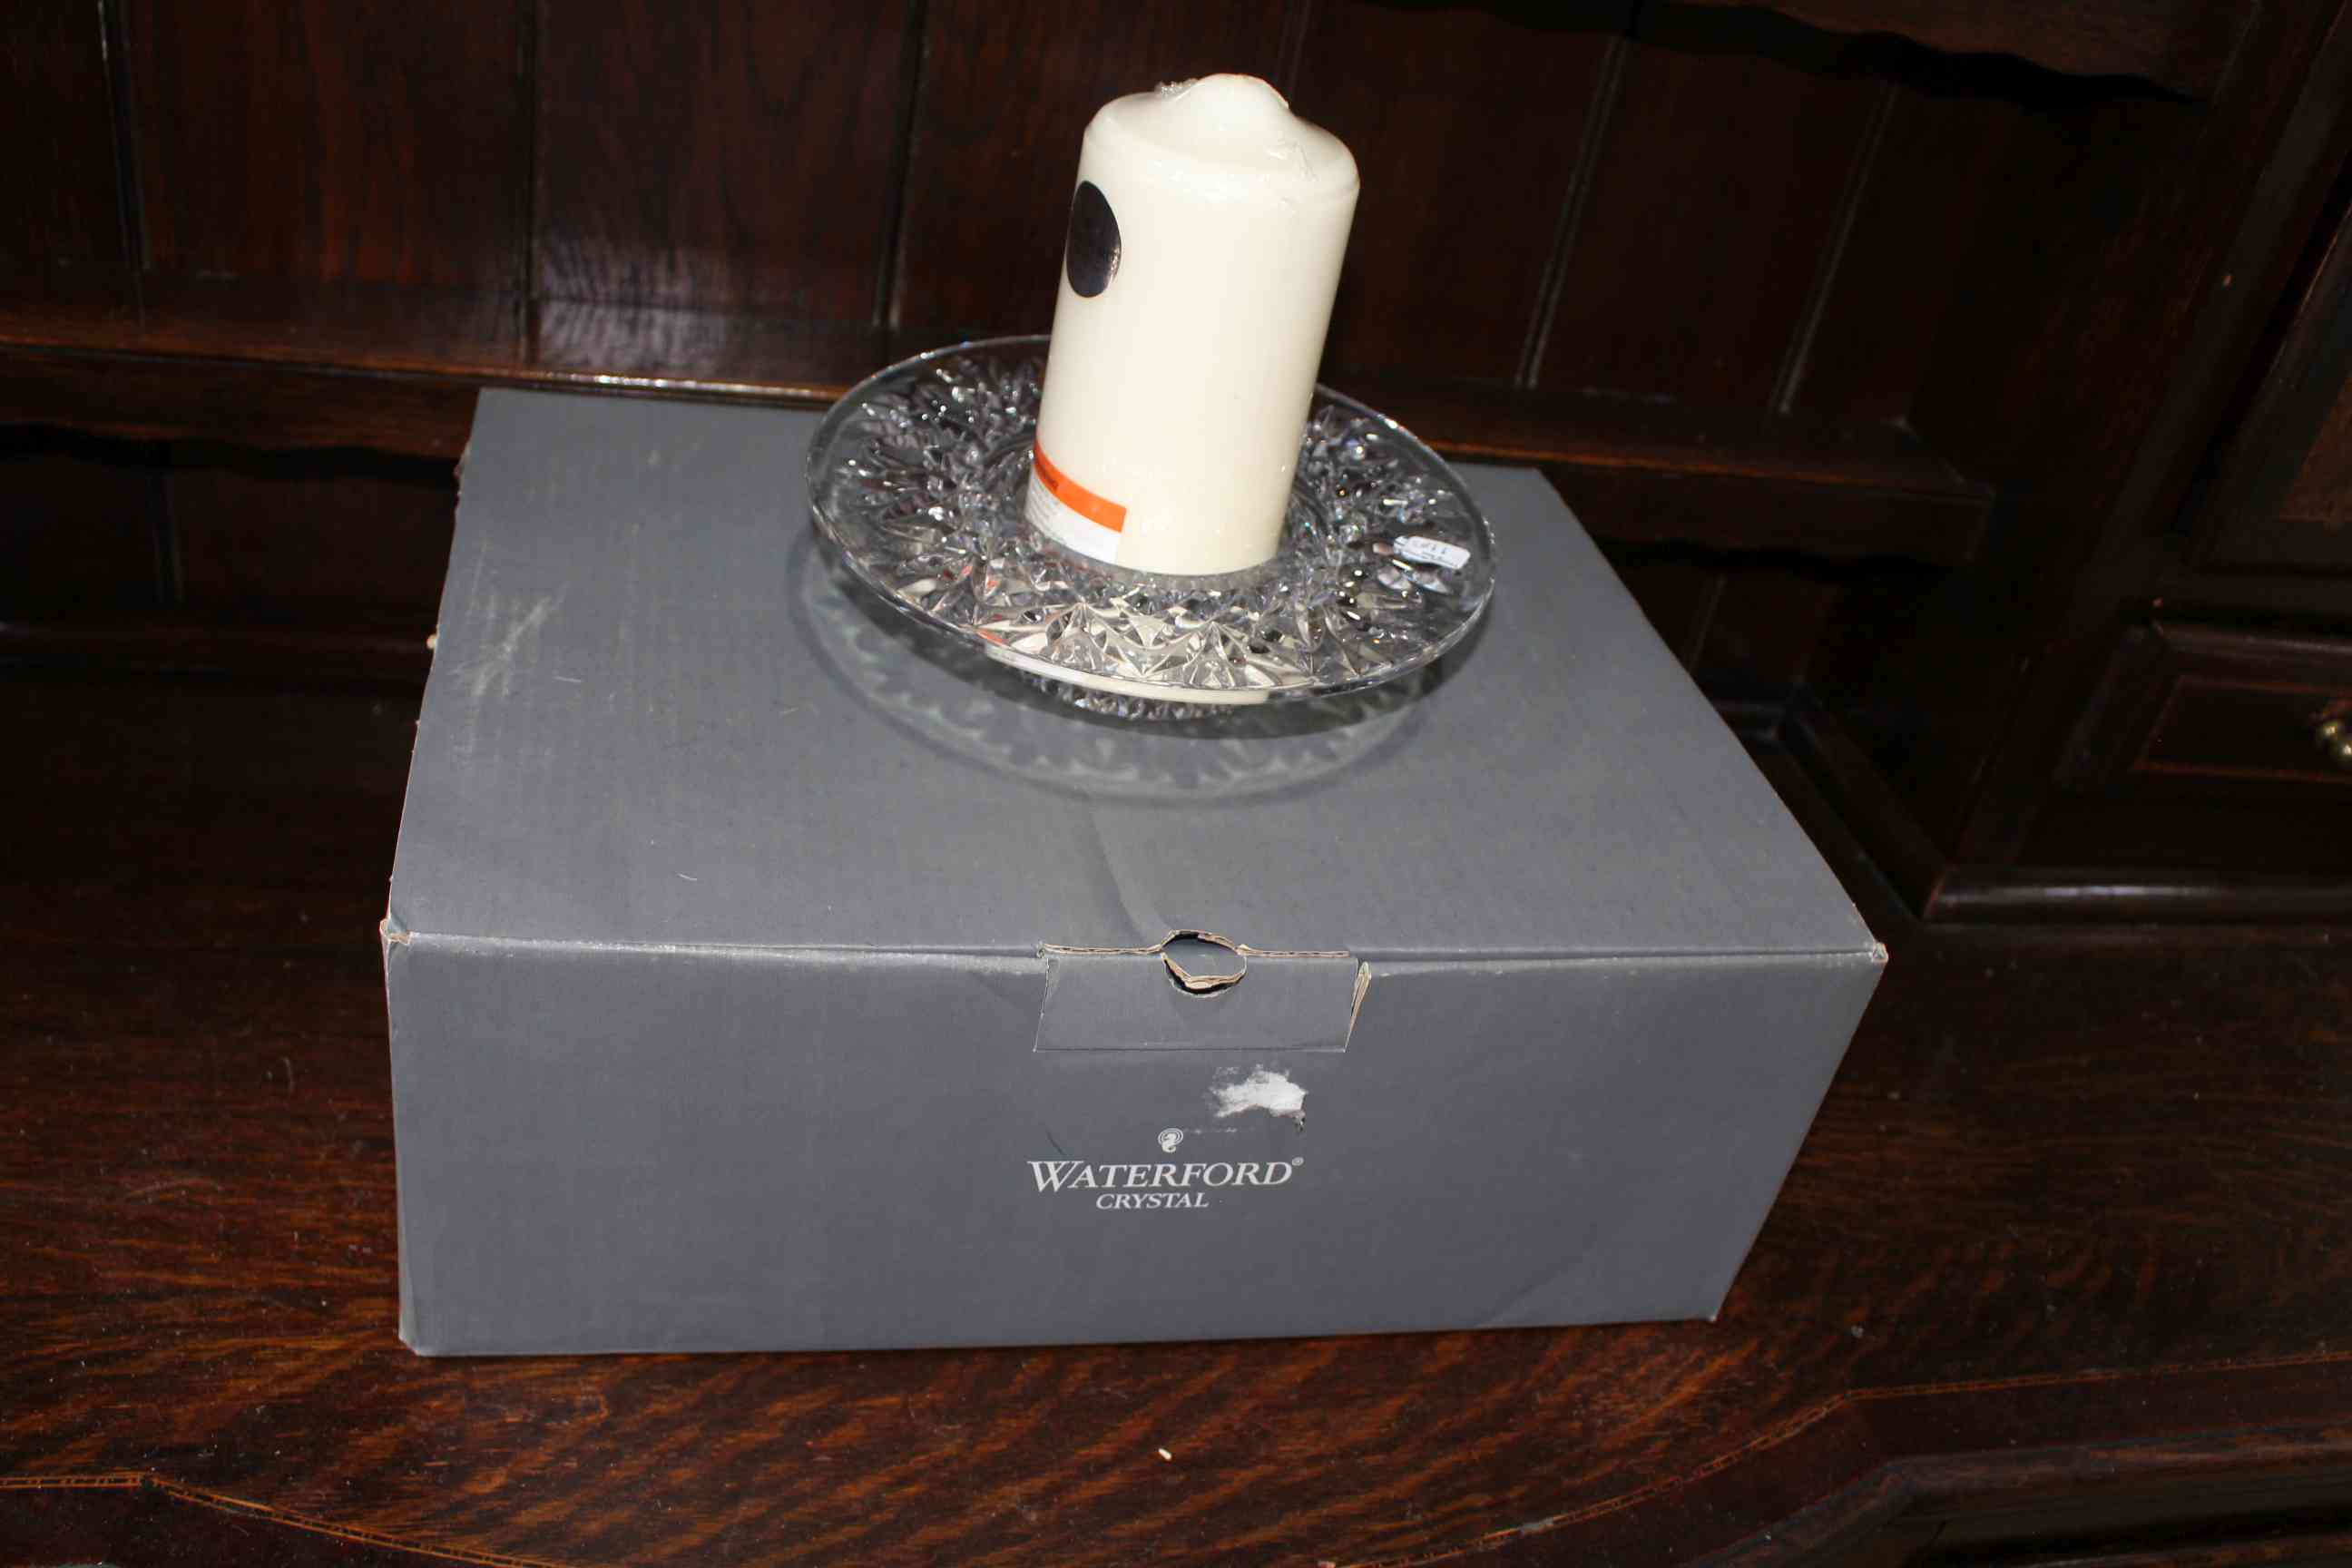 Waterford crystal 'Bethany' candle holder with box and candle.